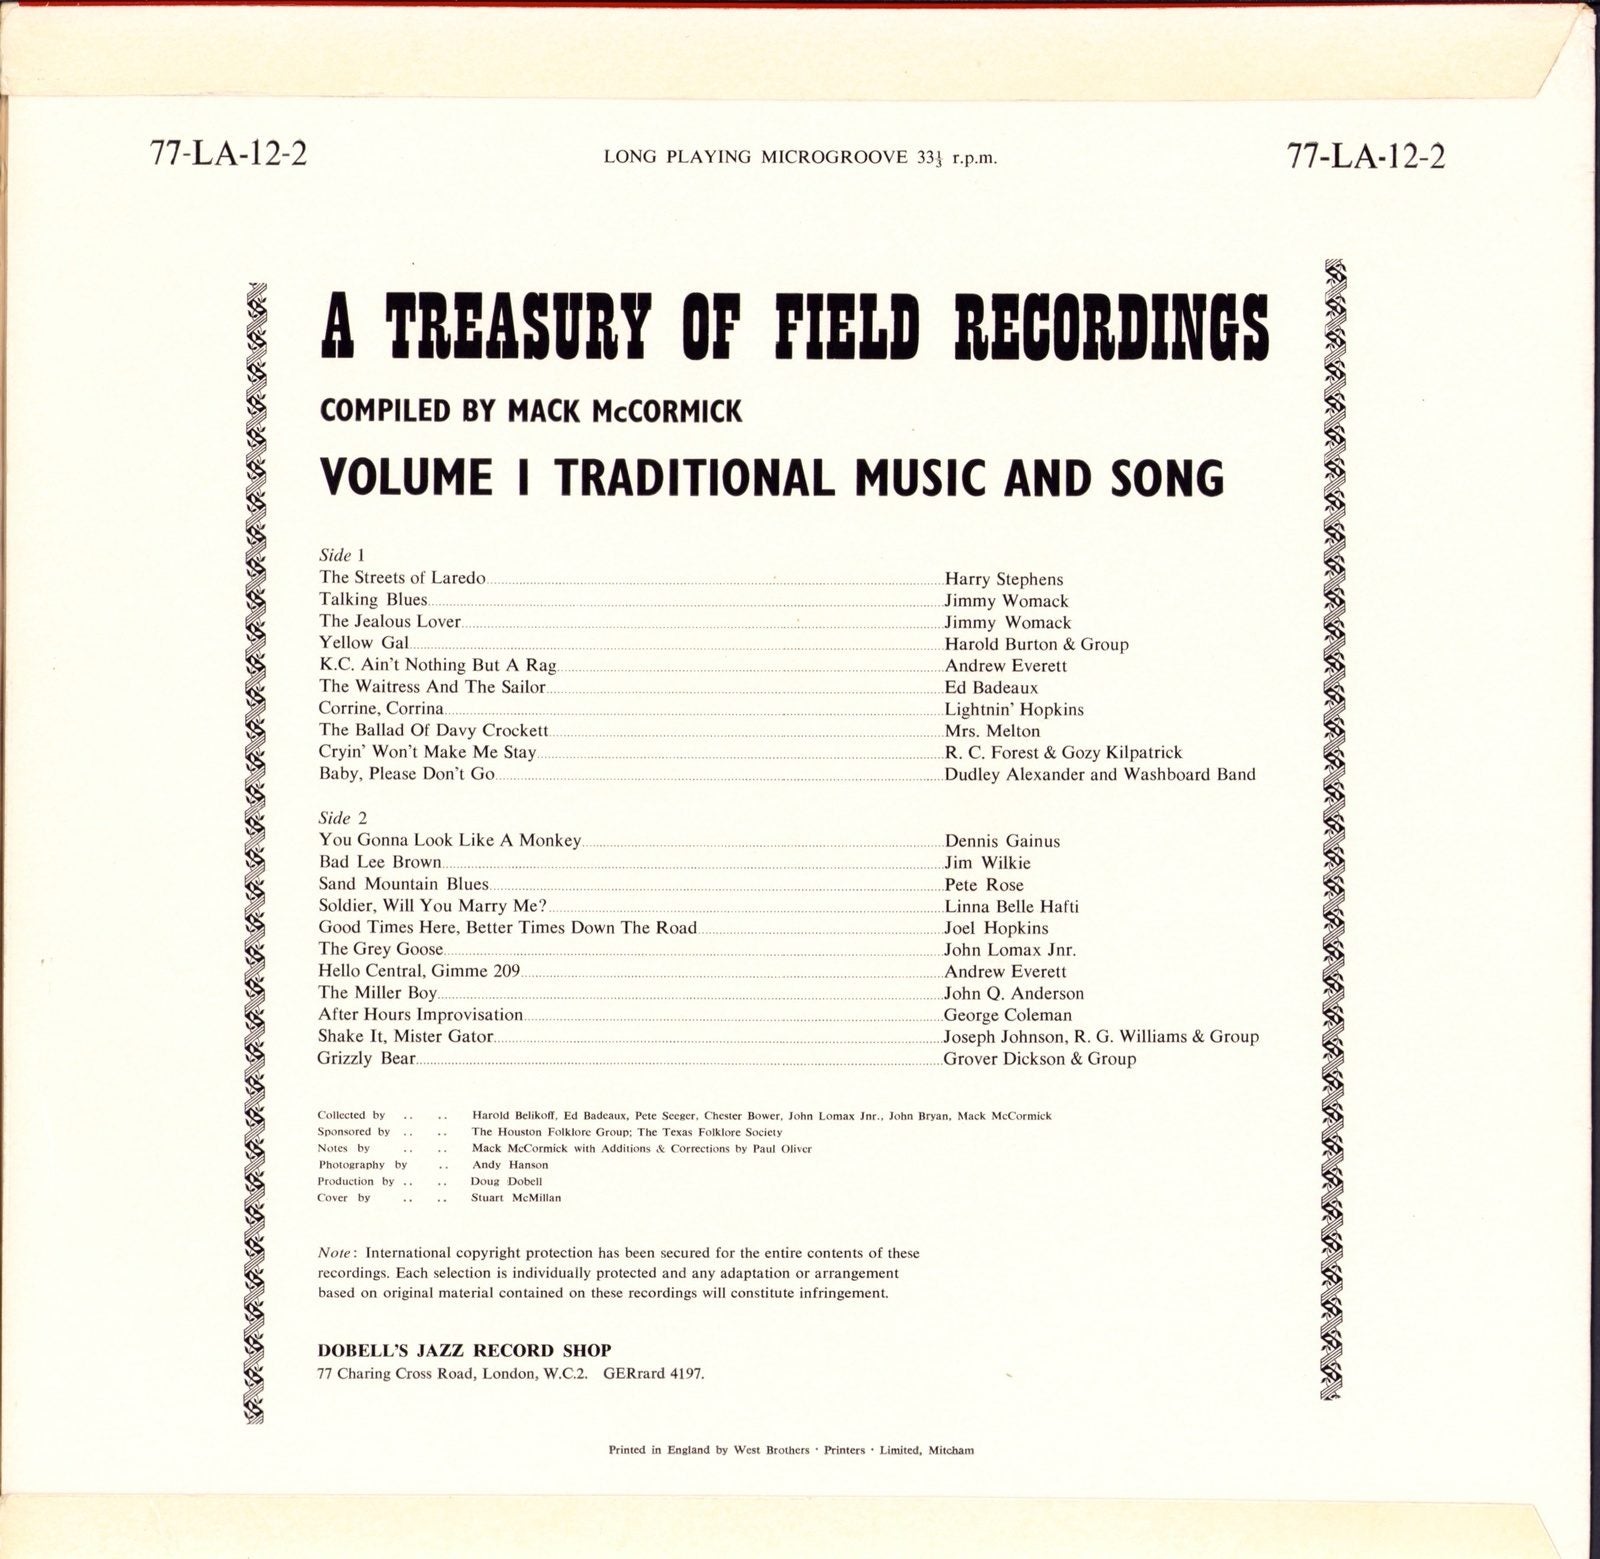 Treasury Of Field Recordings - Volume 1 Traditional Music And Song Vinyl LP